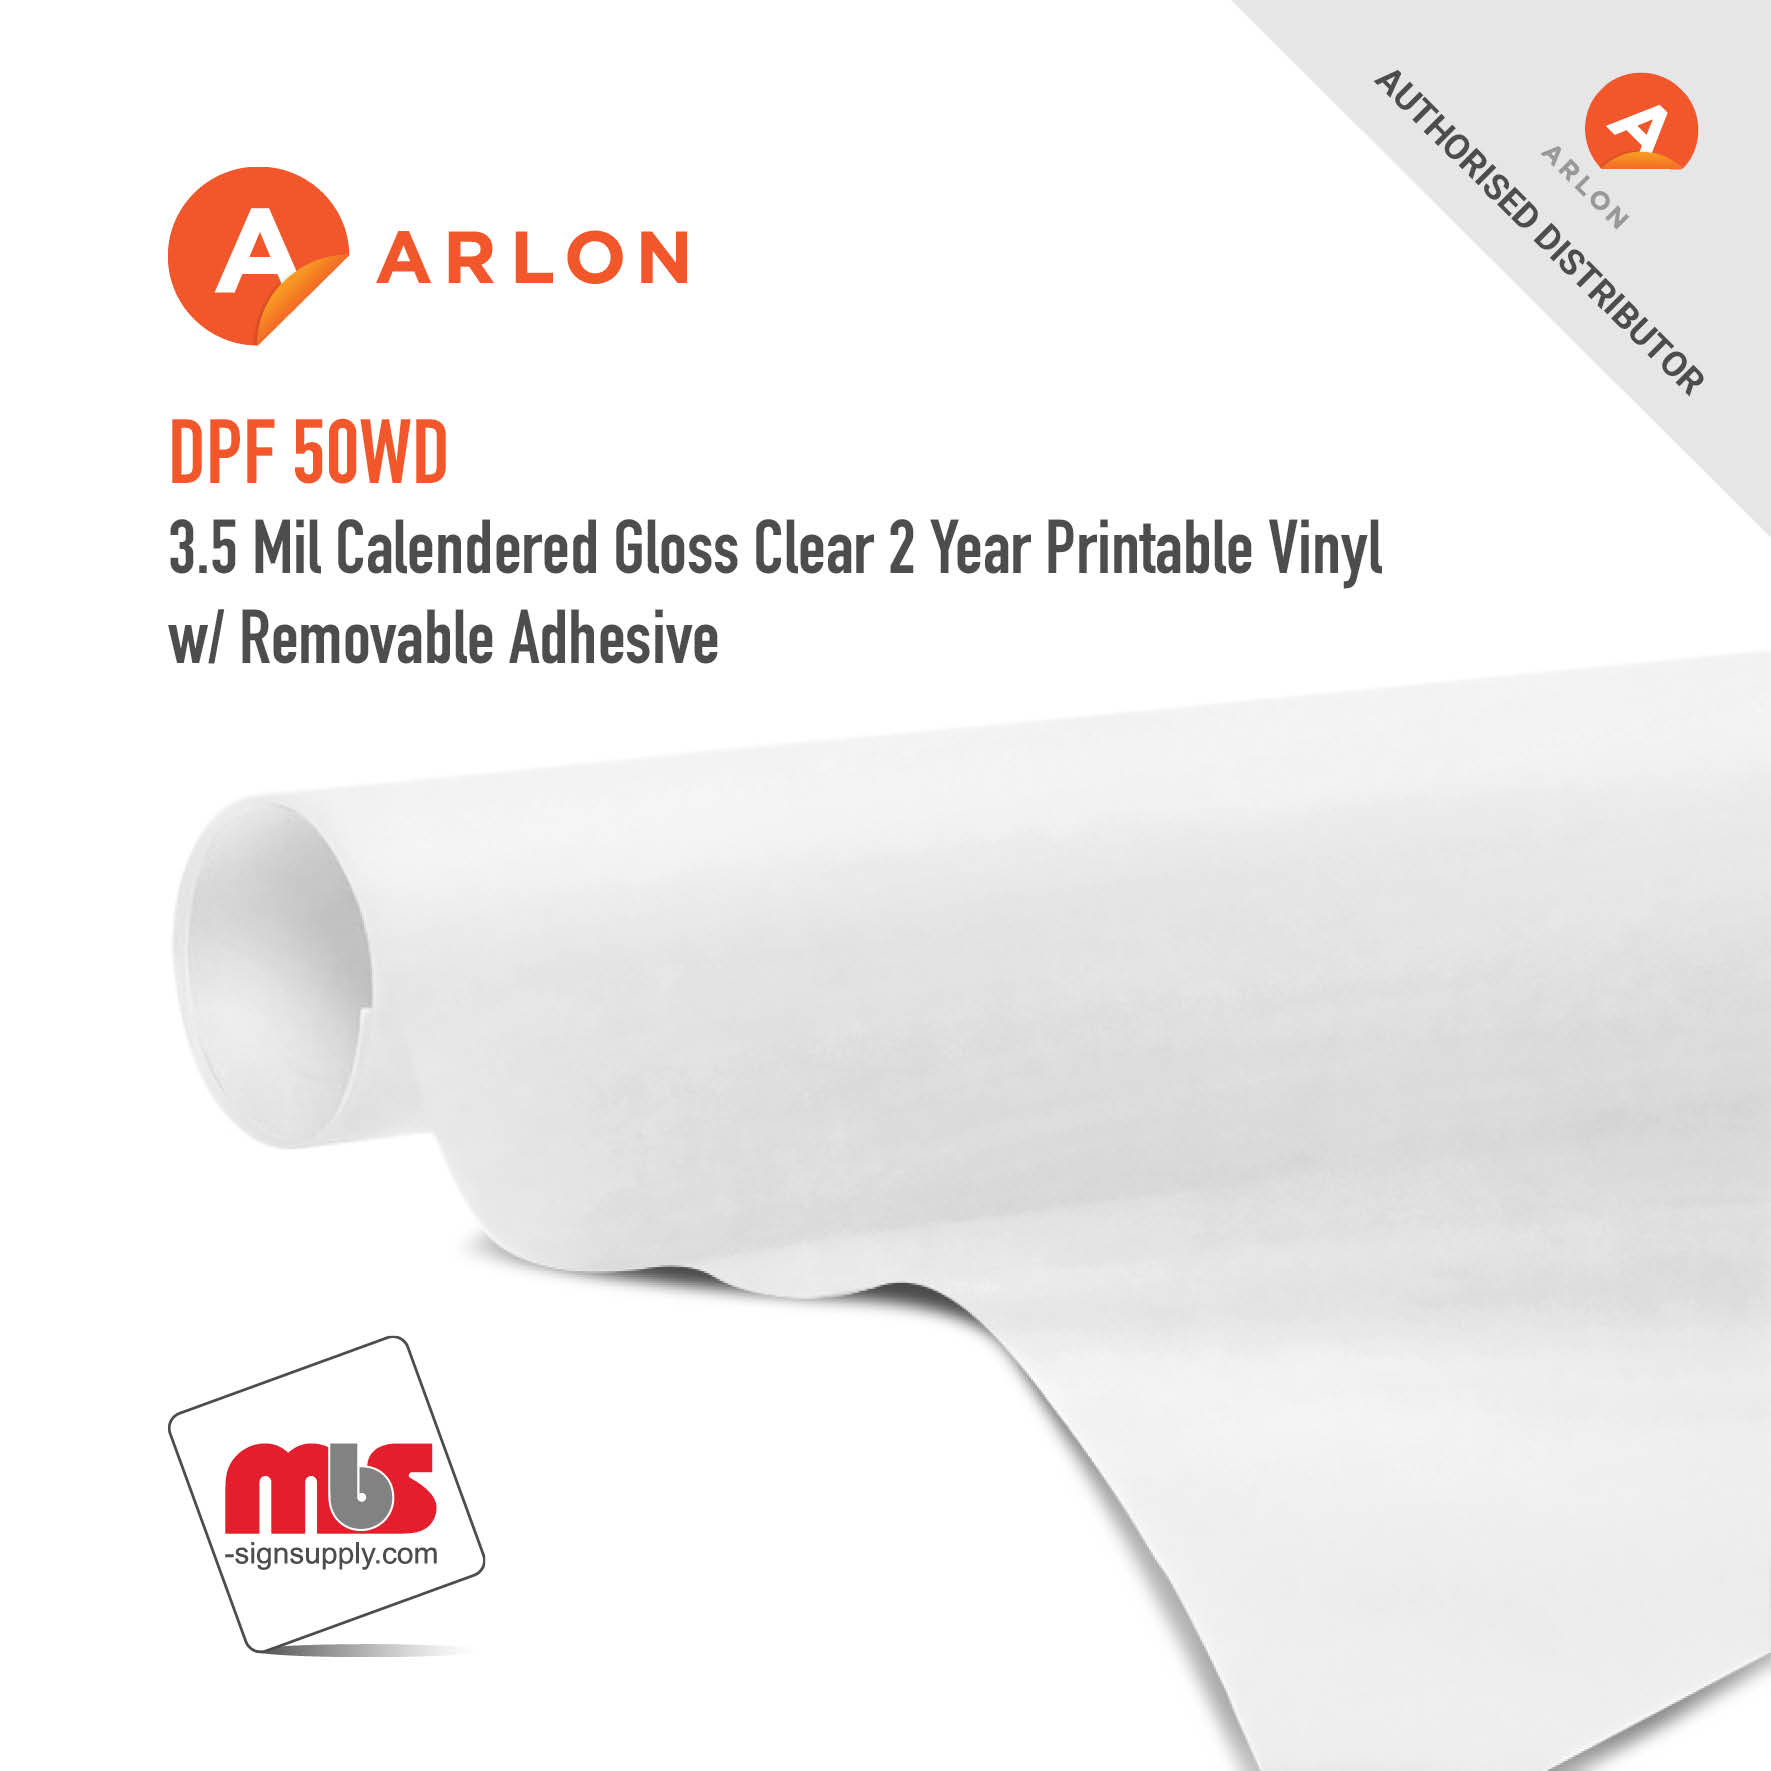 60'' x 50 Yard Roll - Arlon DPF 50WD 3.5 Mil Calendered Gloss Clear 2 Year Printable Vinyl w/ Removable Adhesive